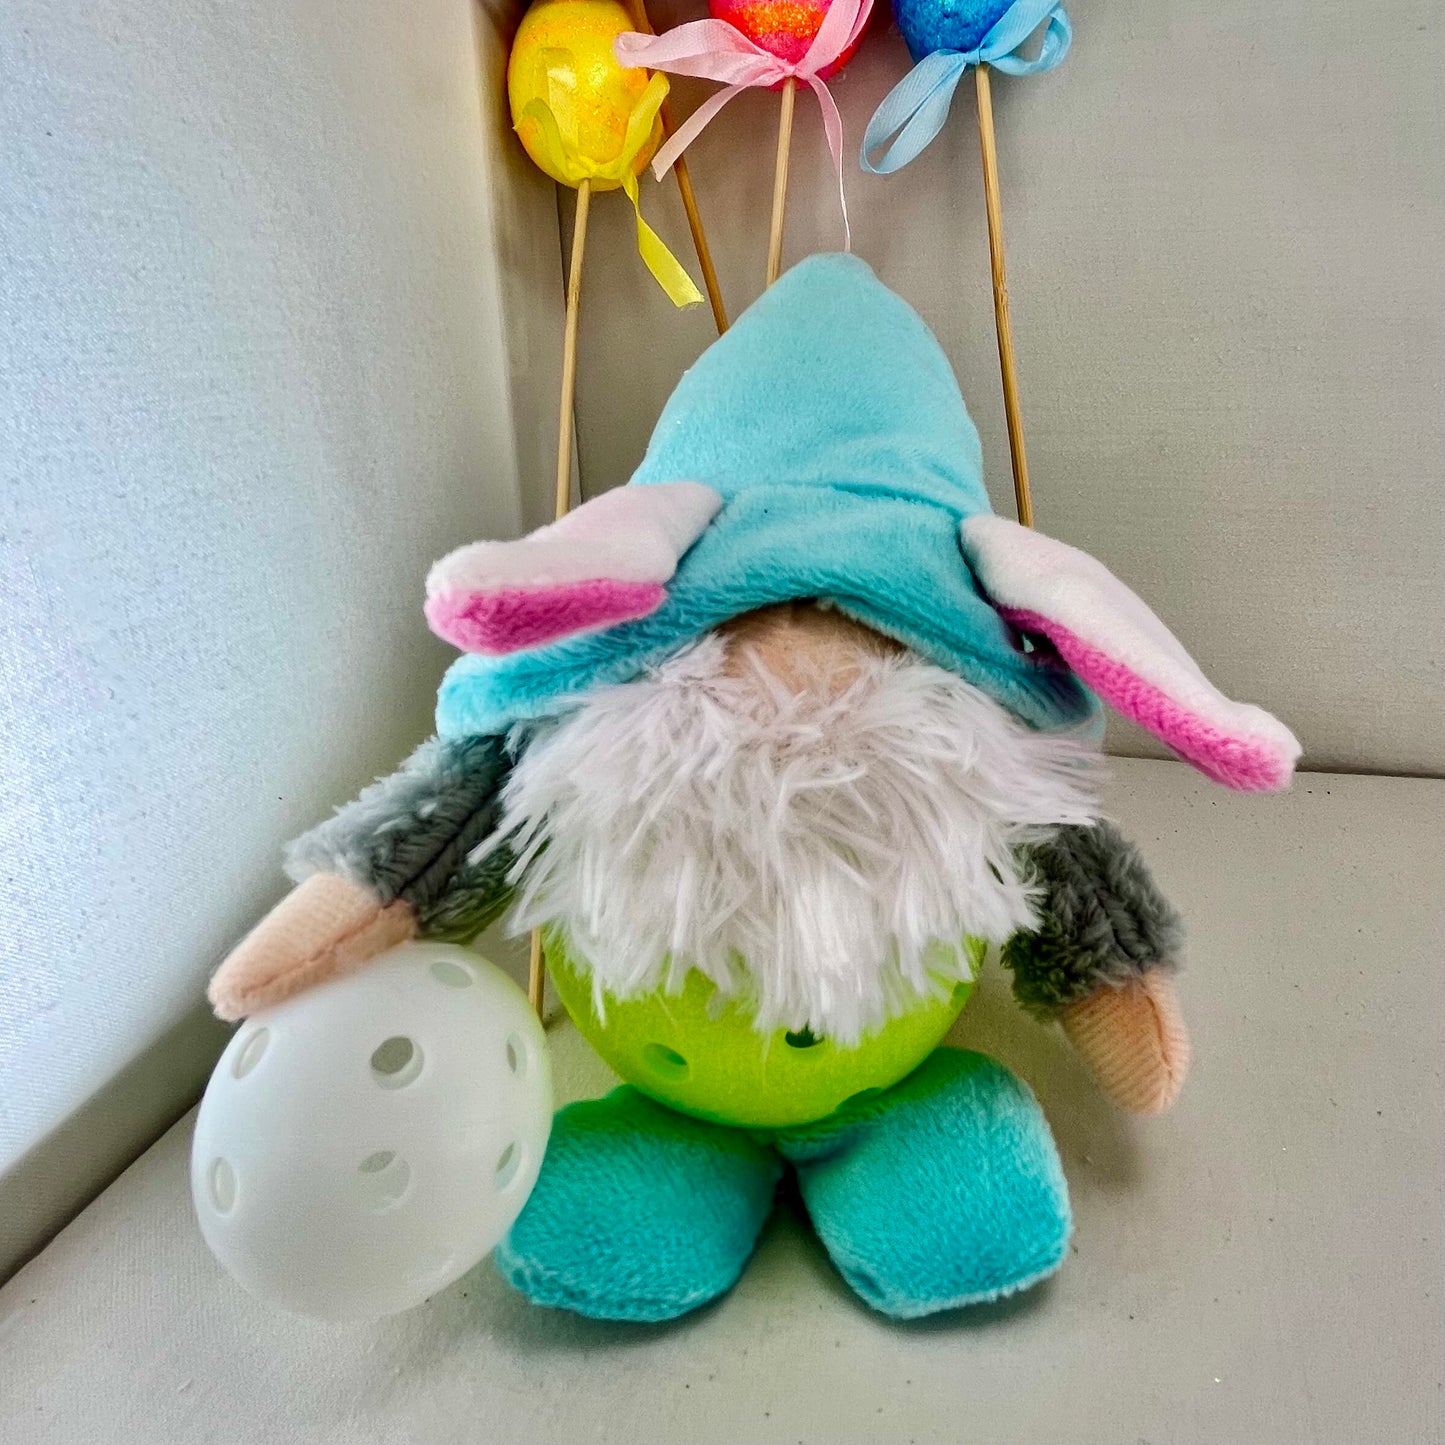 Upcycled Pickleball Easter bunny gnomes for the Easter Holiday.  Decoration or gift set.  These pint-sized pickleball gnomes are perfect for decoration or gifts for your pickleball addicted friends. Each Pickleball Gnome's body is an upcycled full-sized pickleball with a cute little egg in their hands.